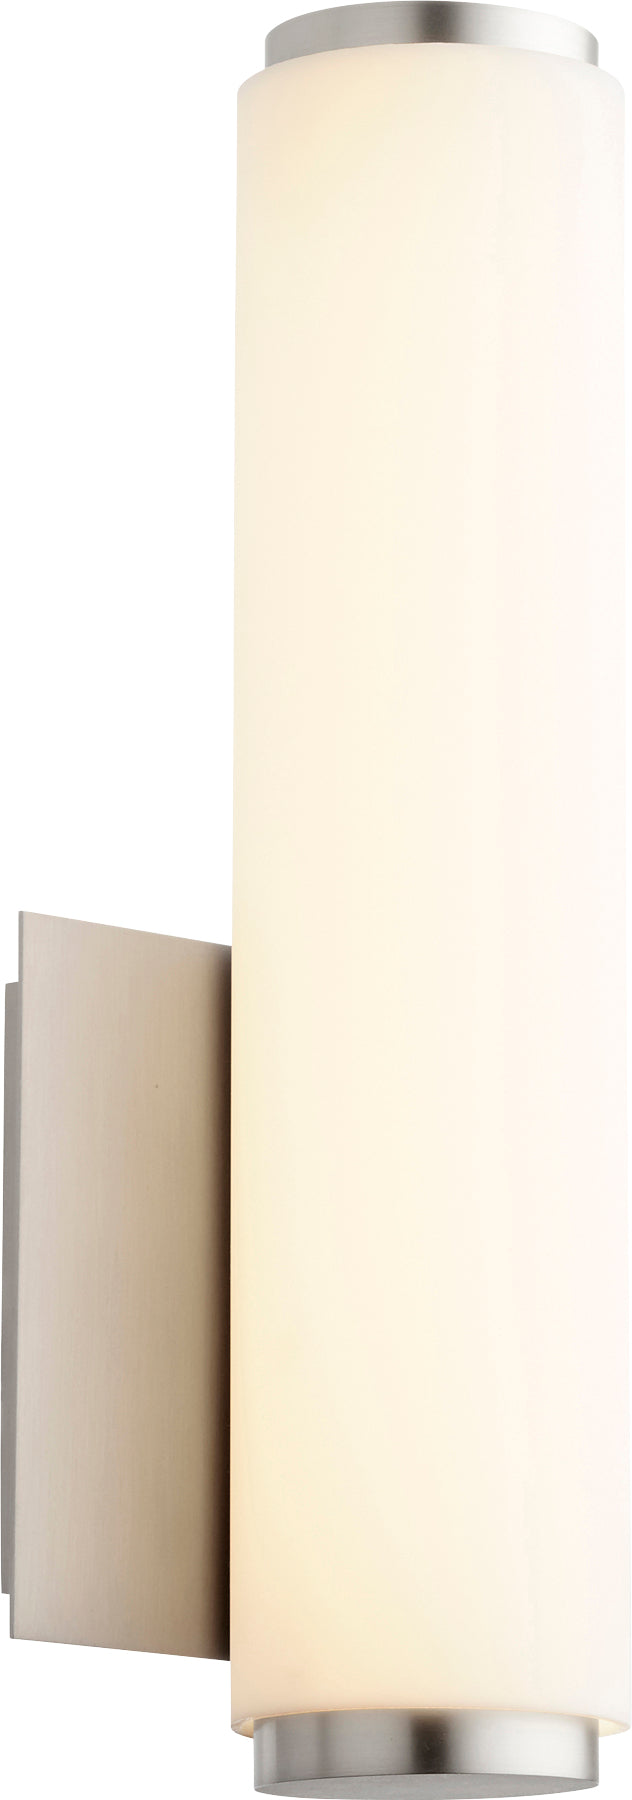 1 Light Modern and Contemporary Satin Nickel LED Wall Sconce